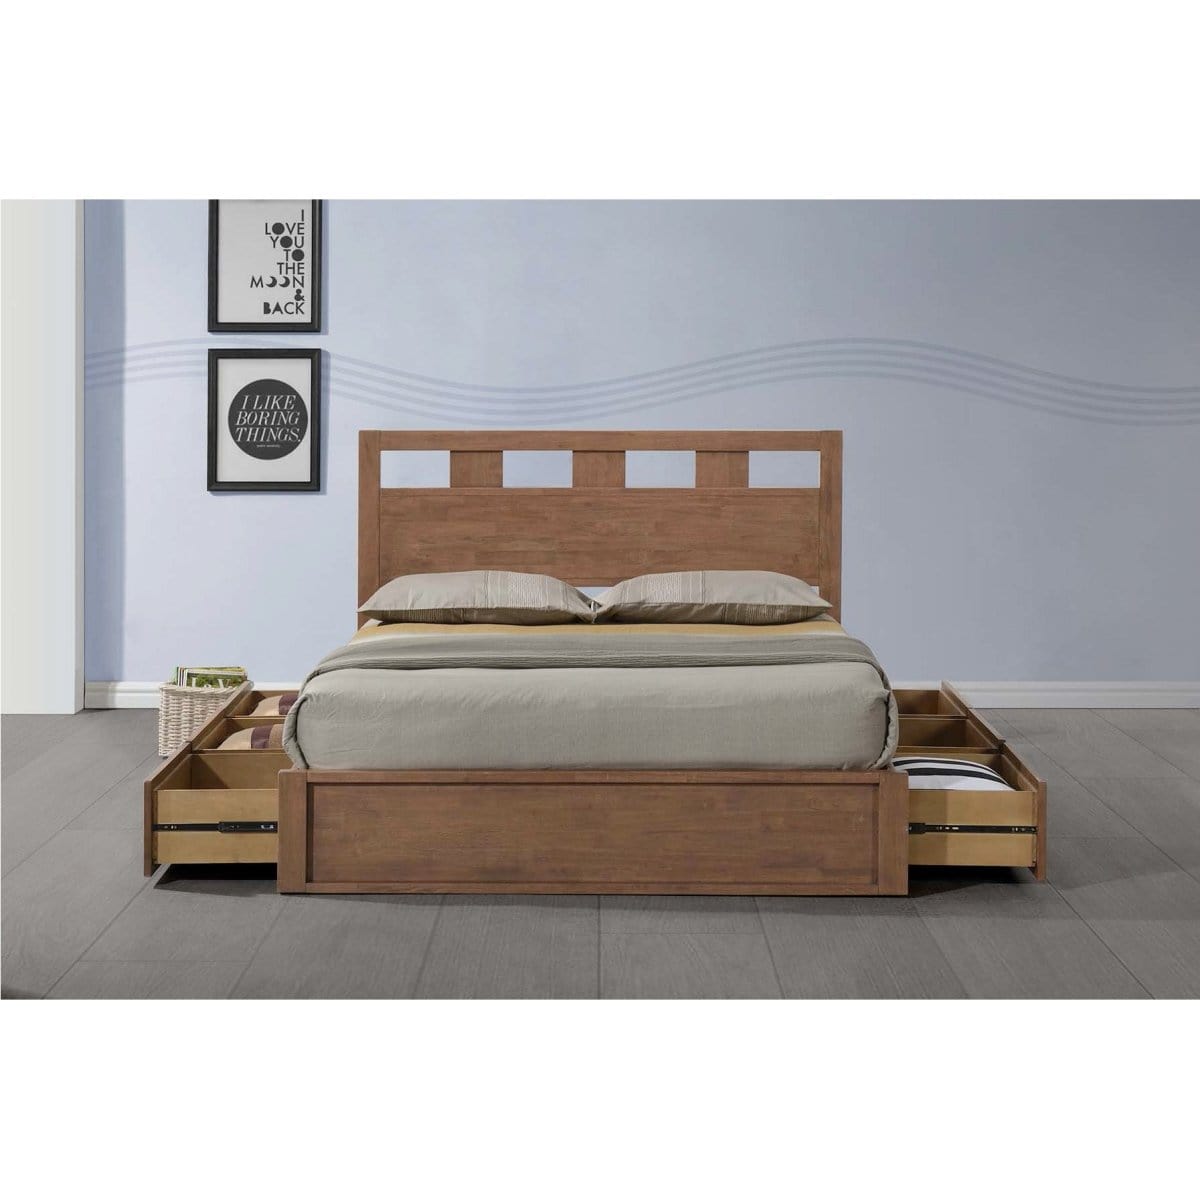 #1 Ashton 6-Drawer Solid Wood Queen Storage Bed ITG-1366B picket and rail